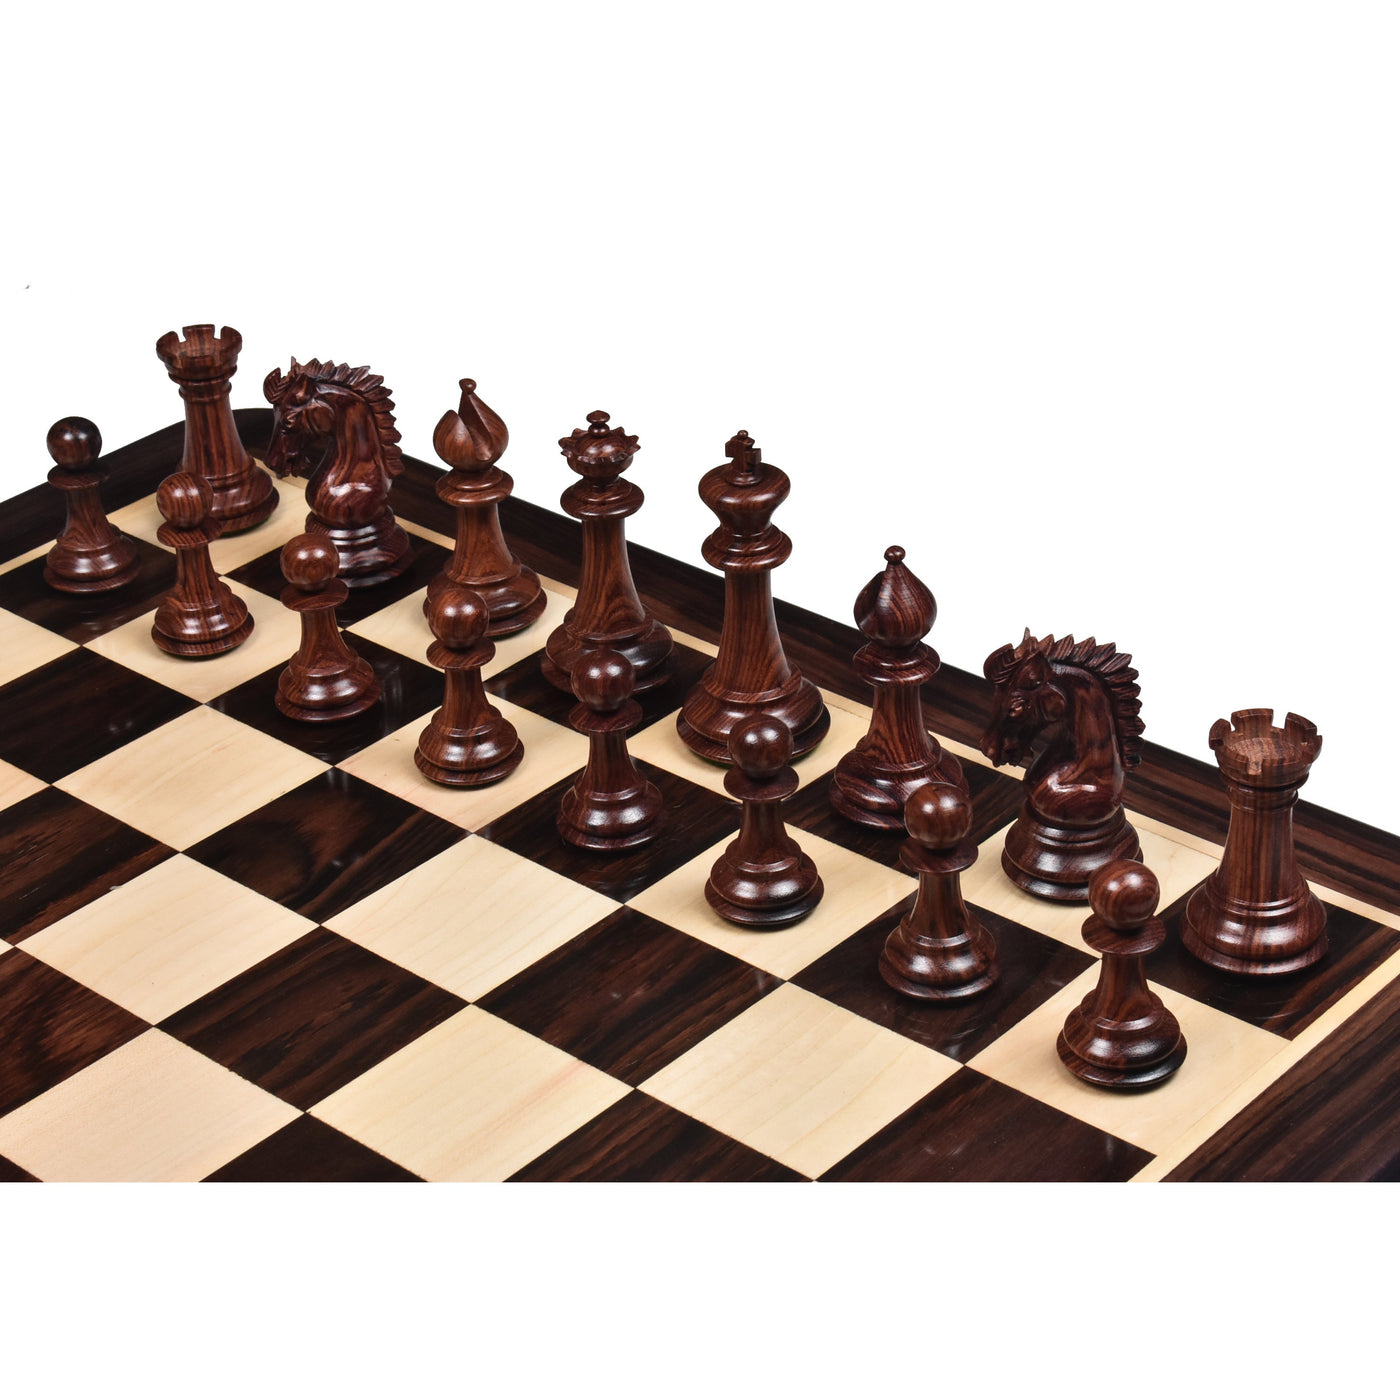 3.7" Emperor Series Staunton Chess Set - Chess Pieces Only- Double Weighted Rose Wood